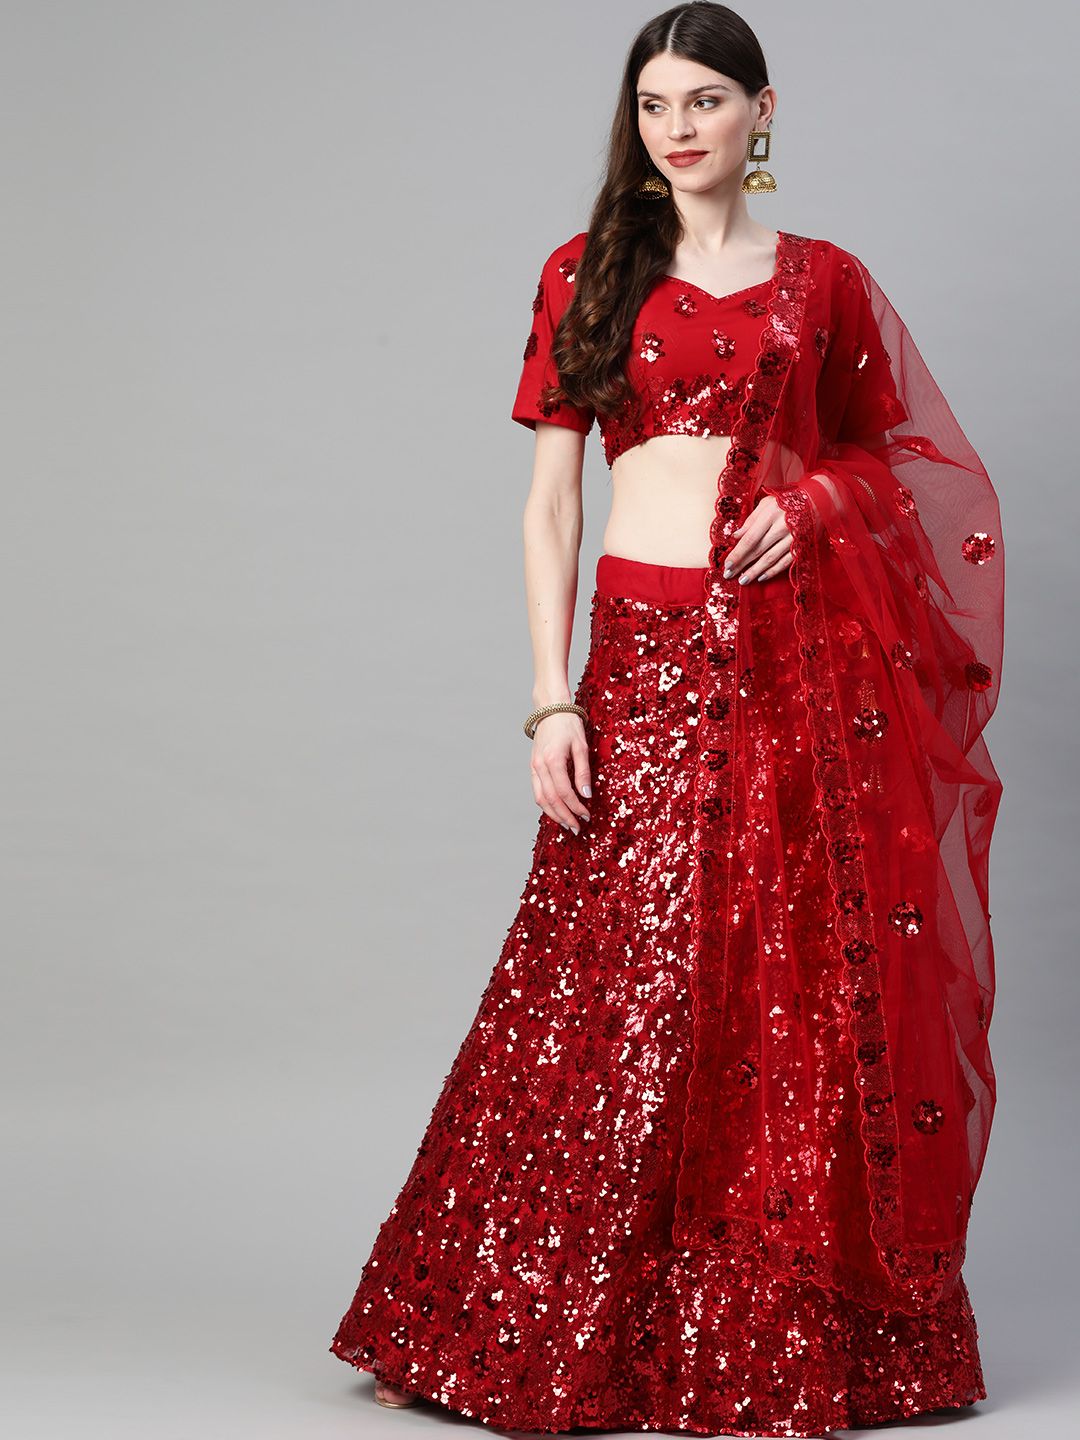 Readiprint Fashions Red Sequinned Semi-Stitched Lehenga & Blouse with Dupatta Price in India